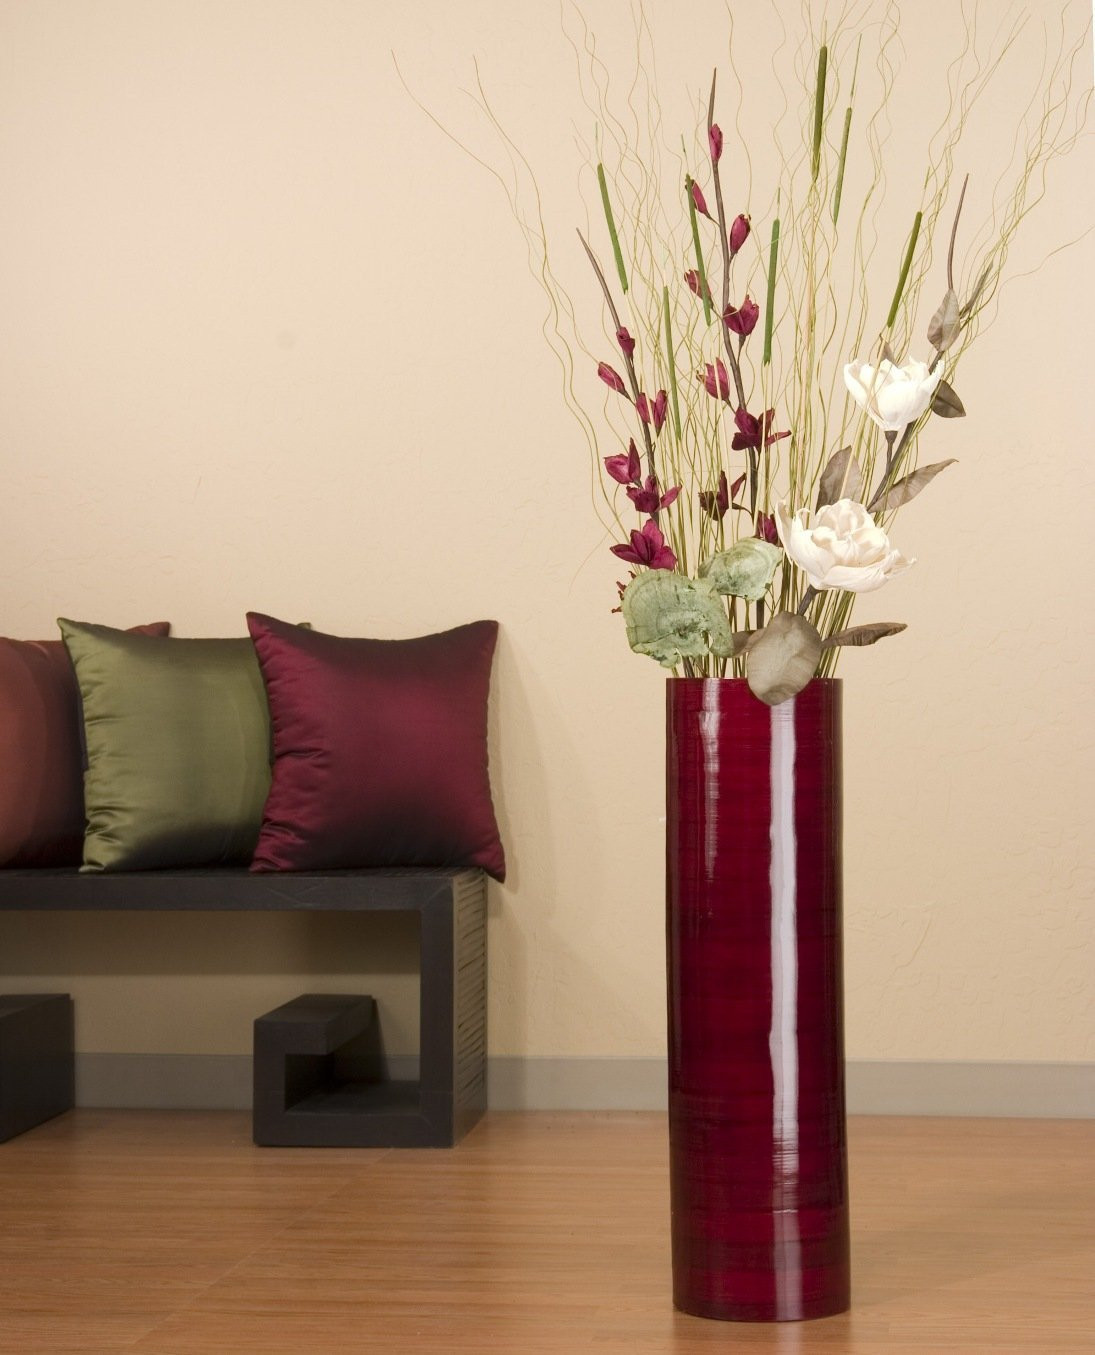 19 Recommended Extra Large Floor Standing Vase | Decorative vase Ideas